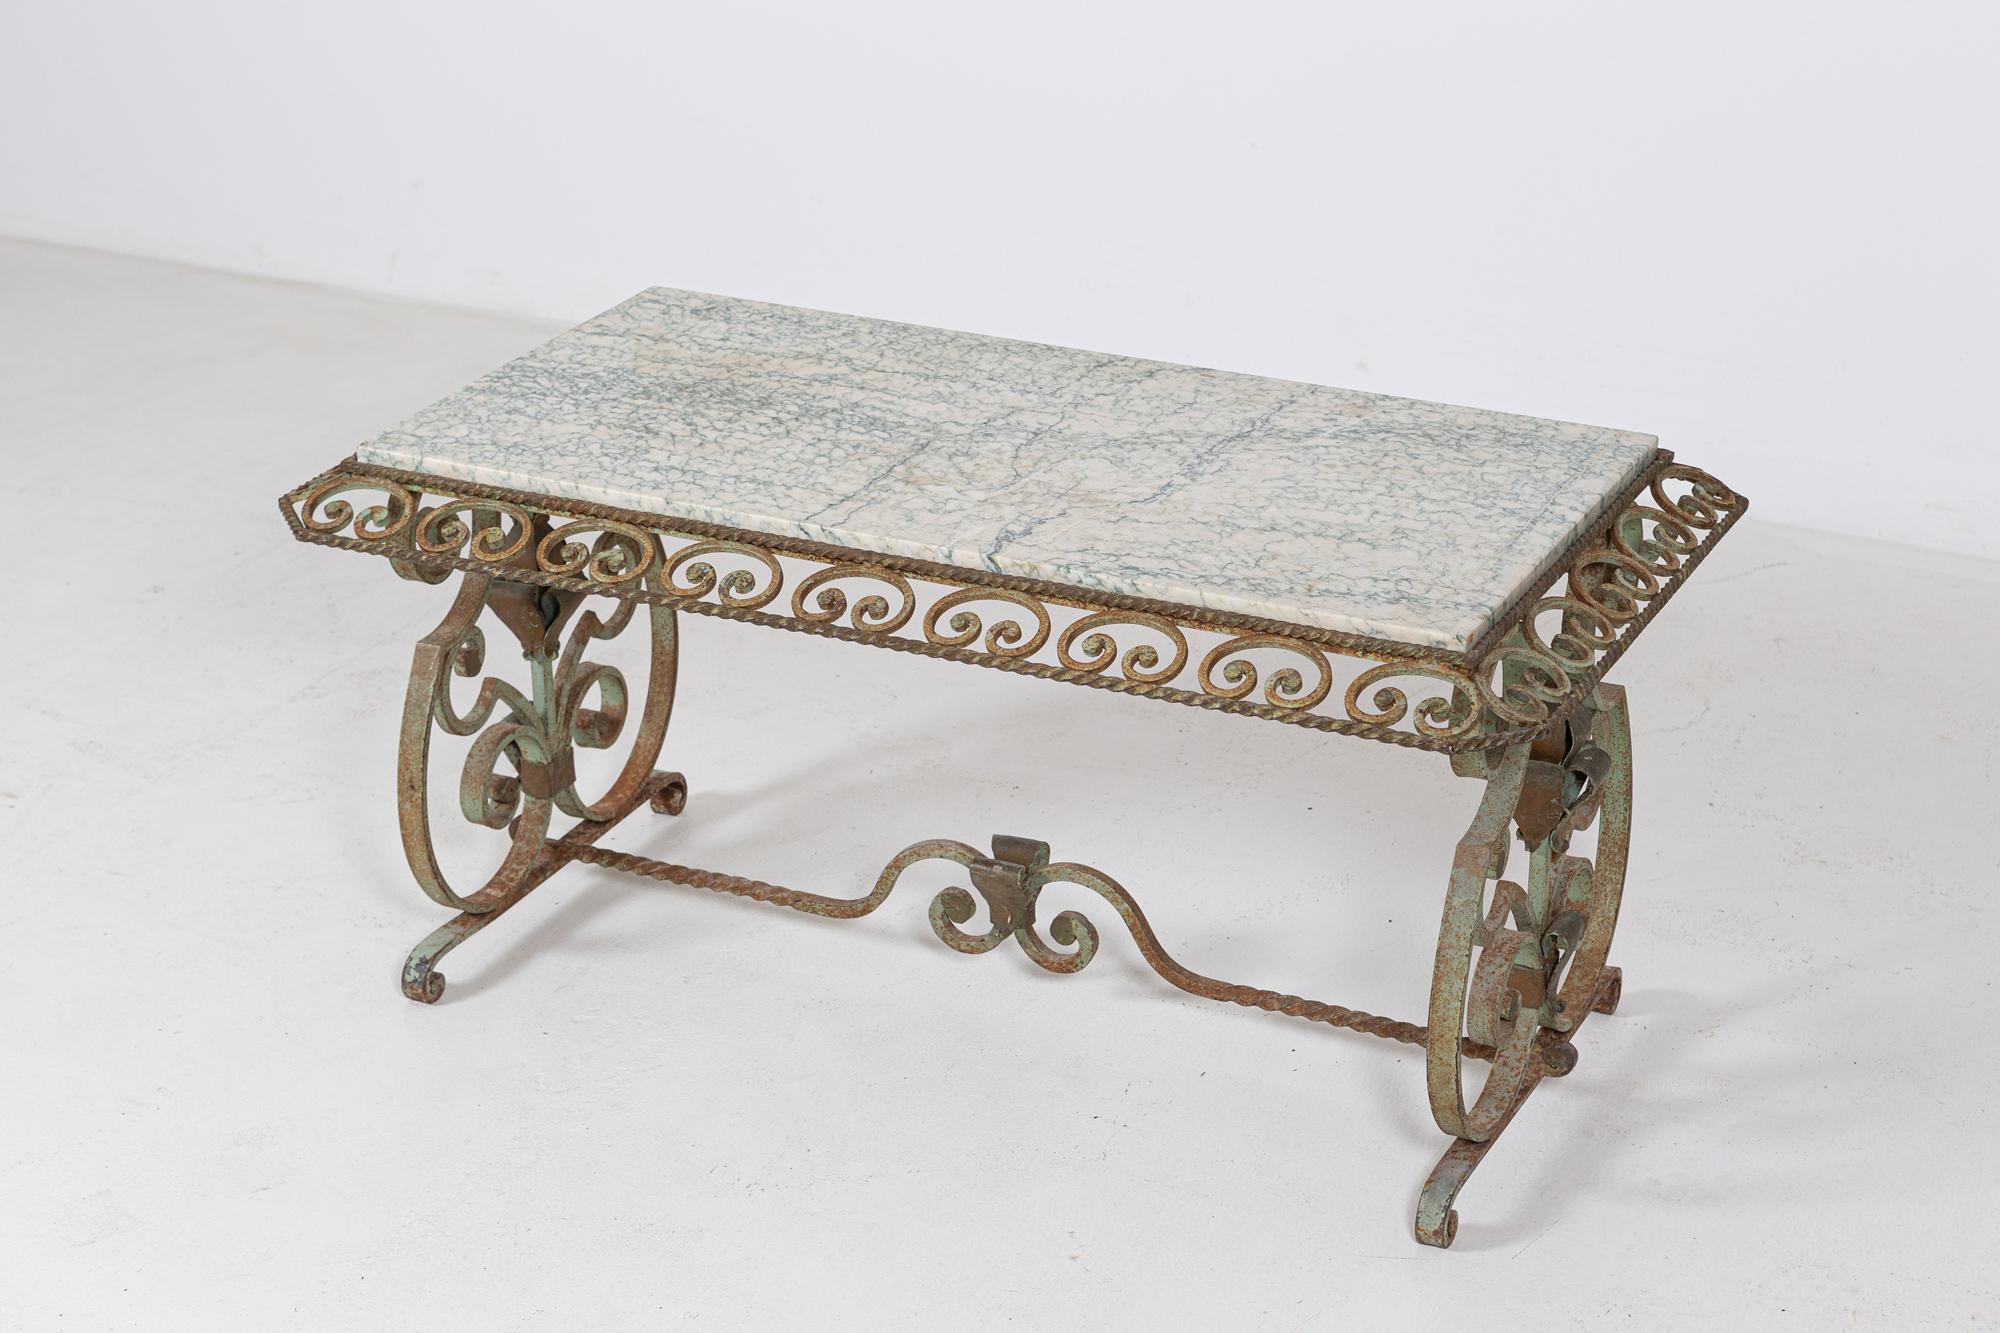 Circa 1940.

French marble & wrought iron coffee table

In the style of the productions of the same period of Gilbert Poillerat

Sourced form the South of France

  

Measures: W104 x D61 x H56 cm.